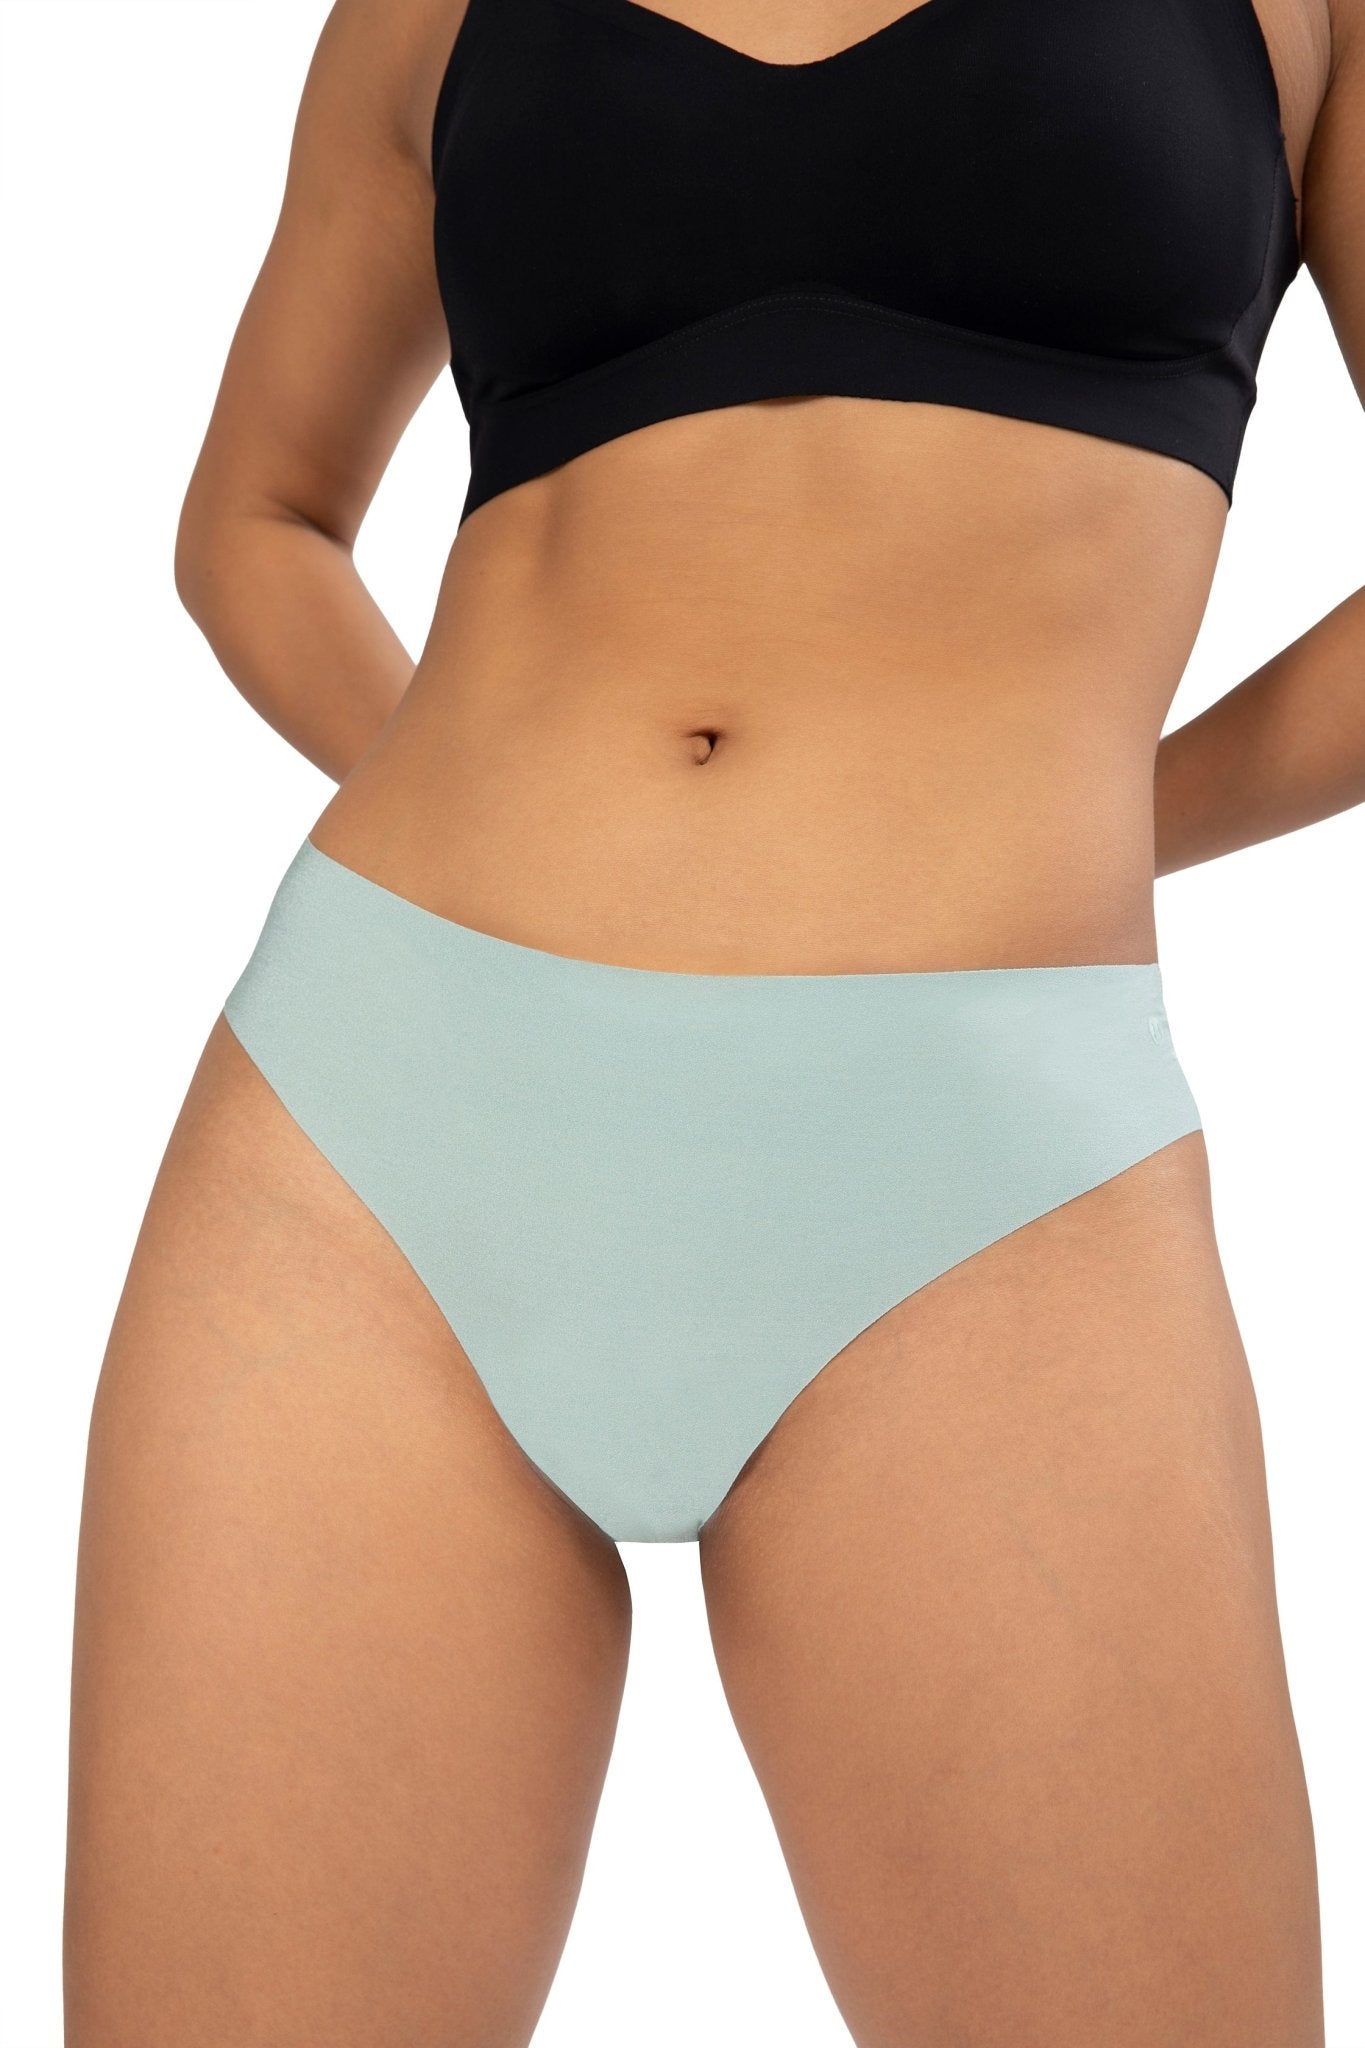 Easy pieces One-Size Thongs - POSESHE